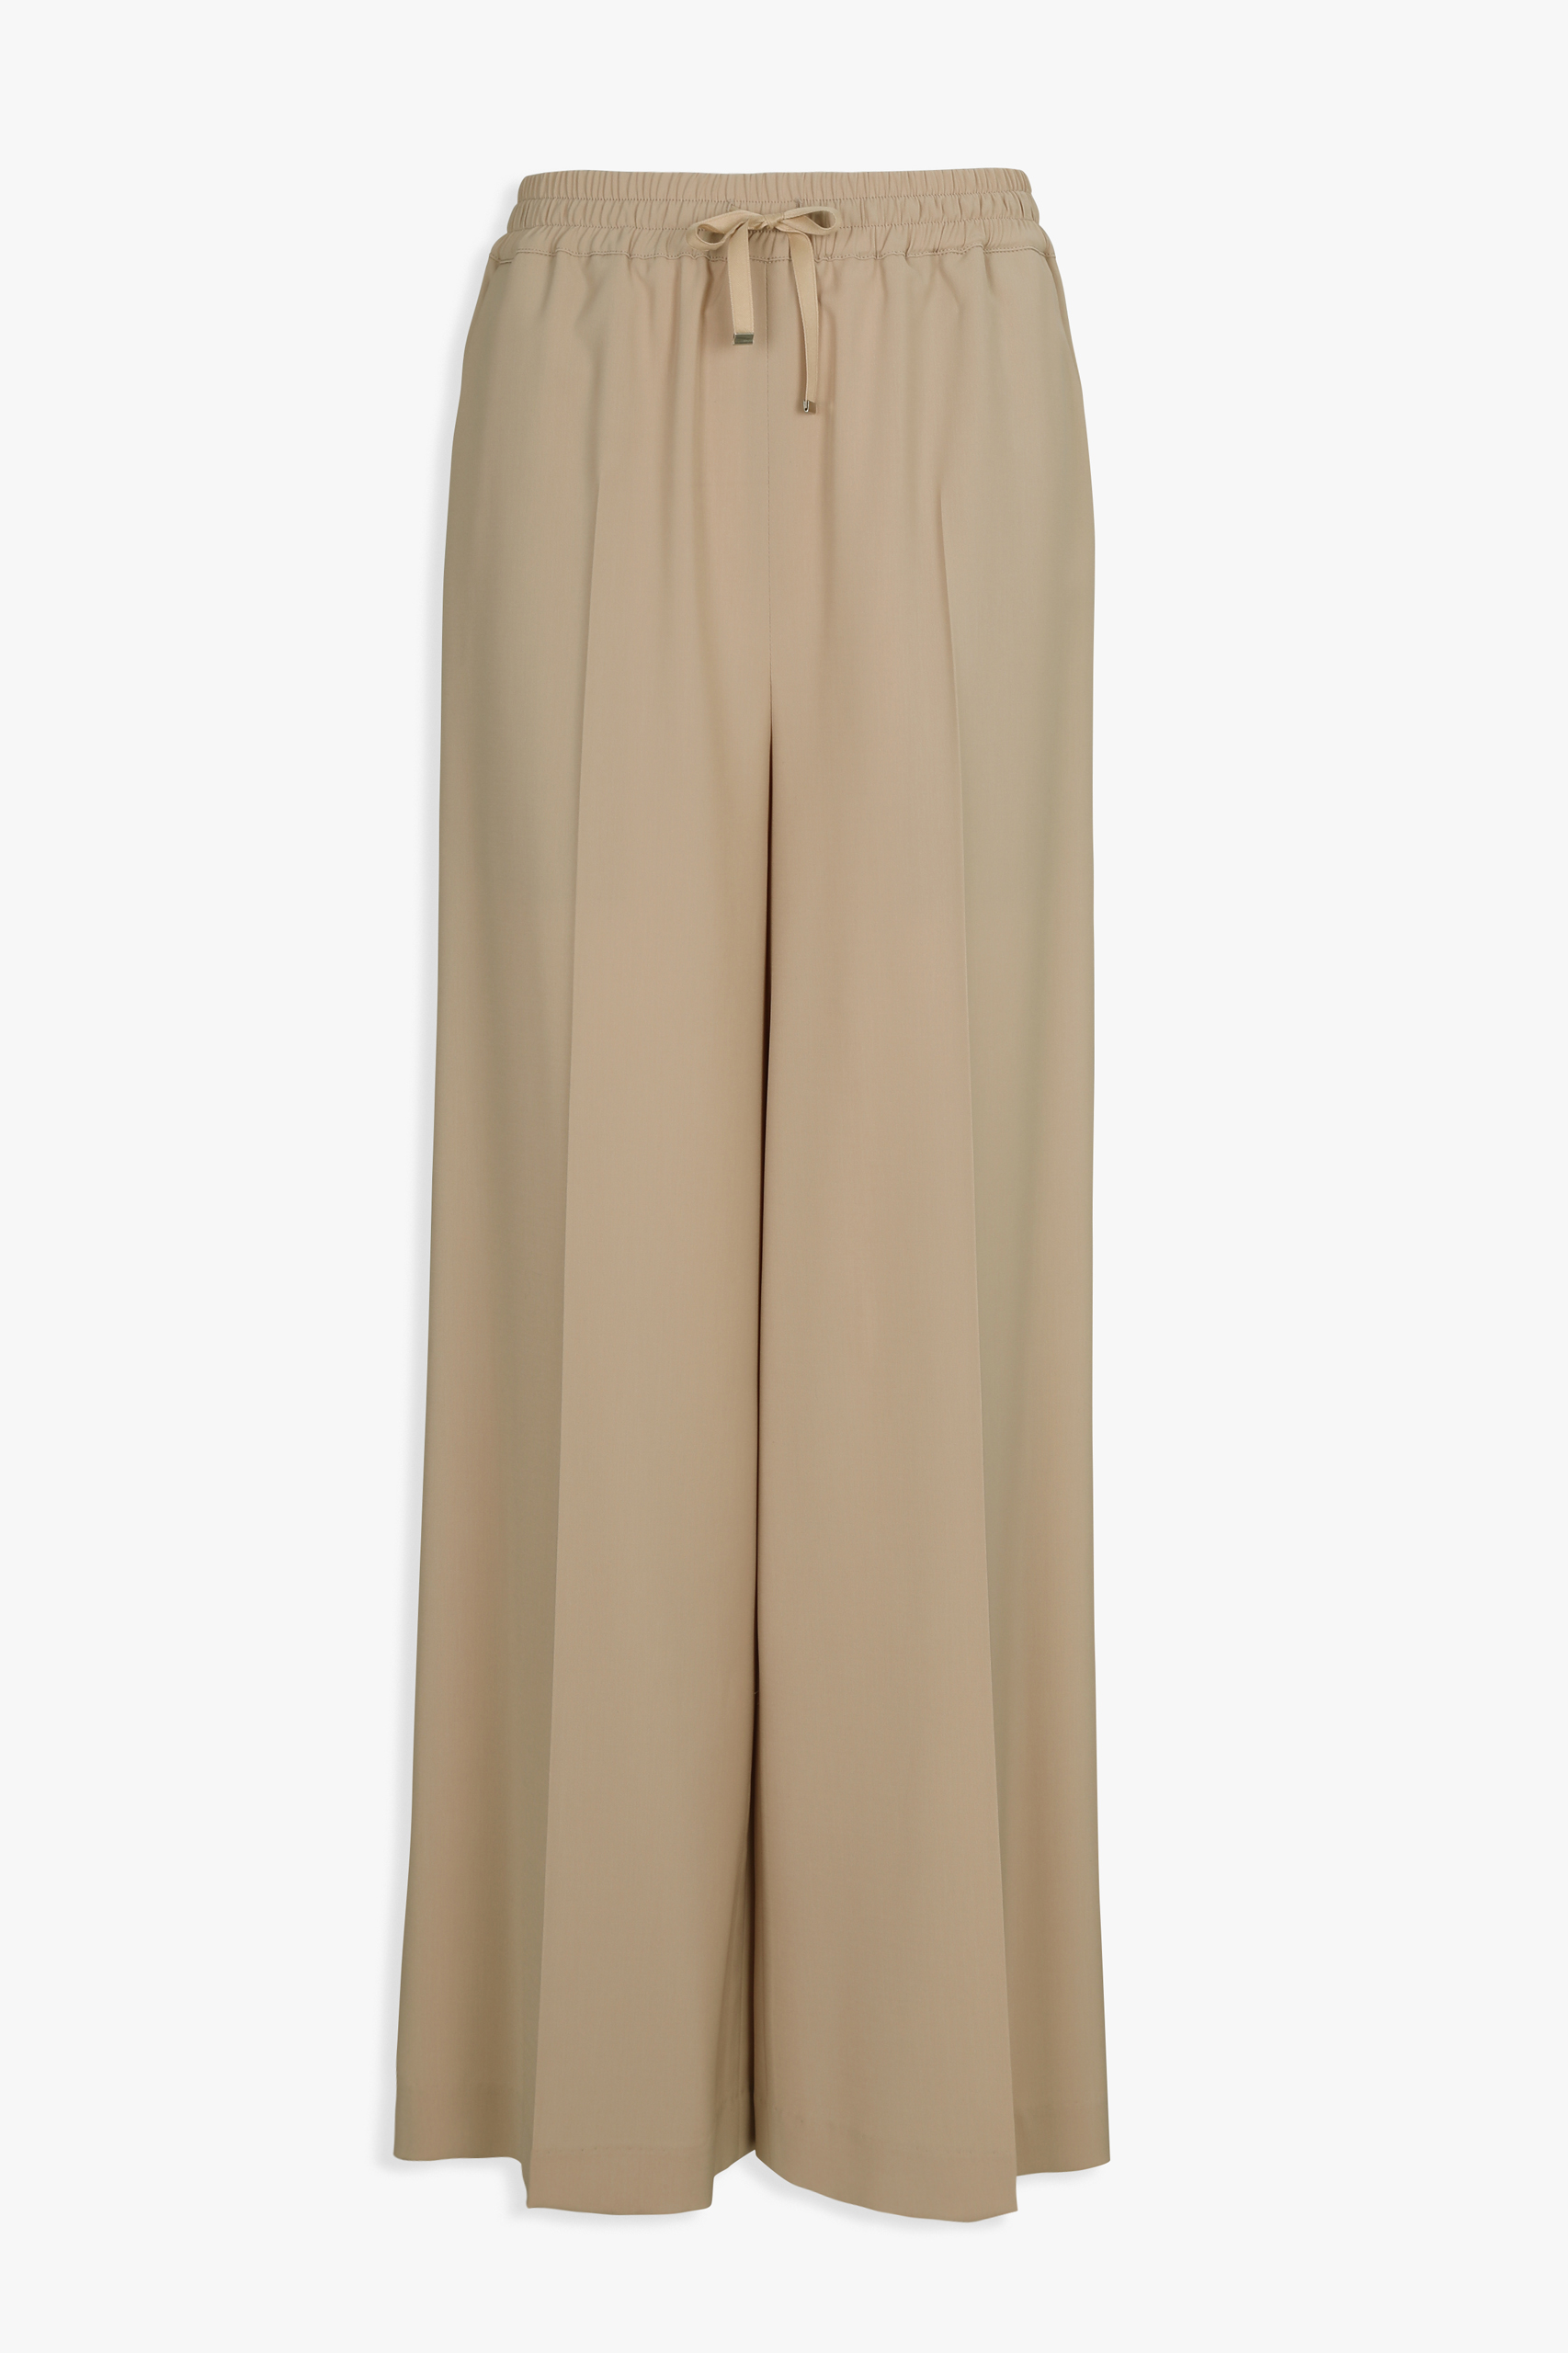 HIGH QUALITY LINE - STRAIGHT TRACK PANTS (BEIGE)